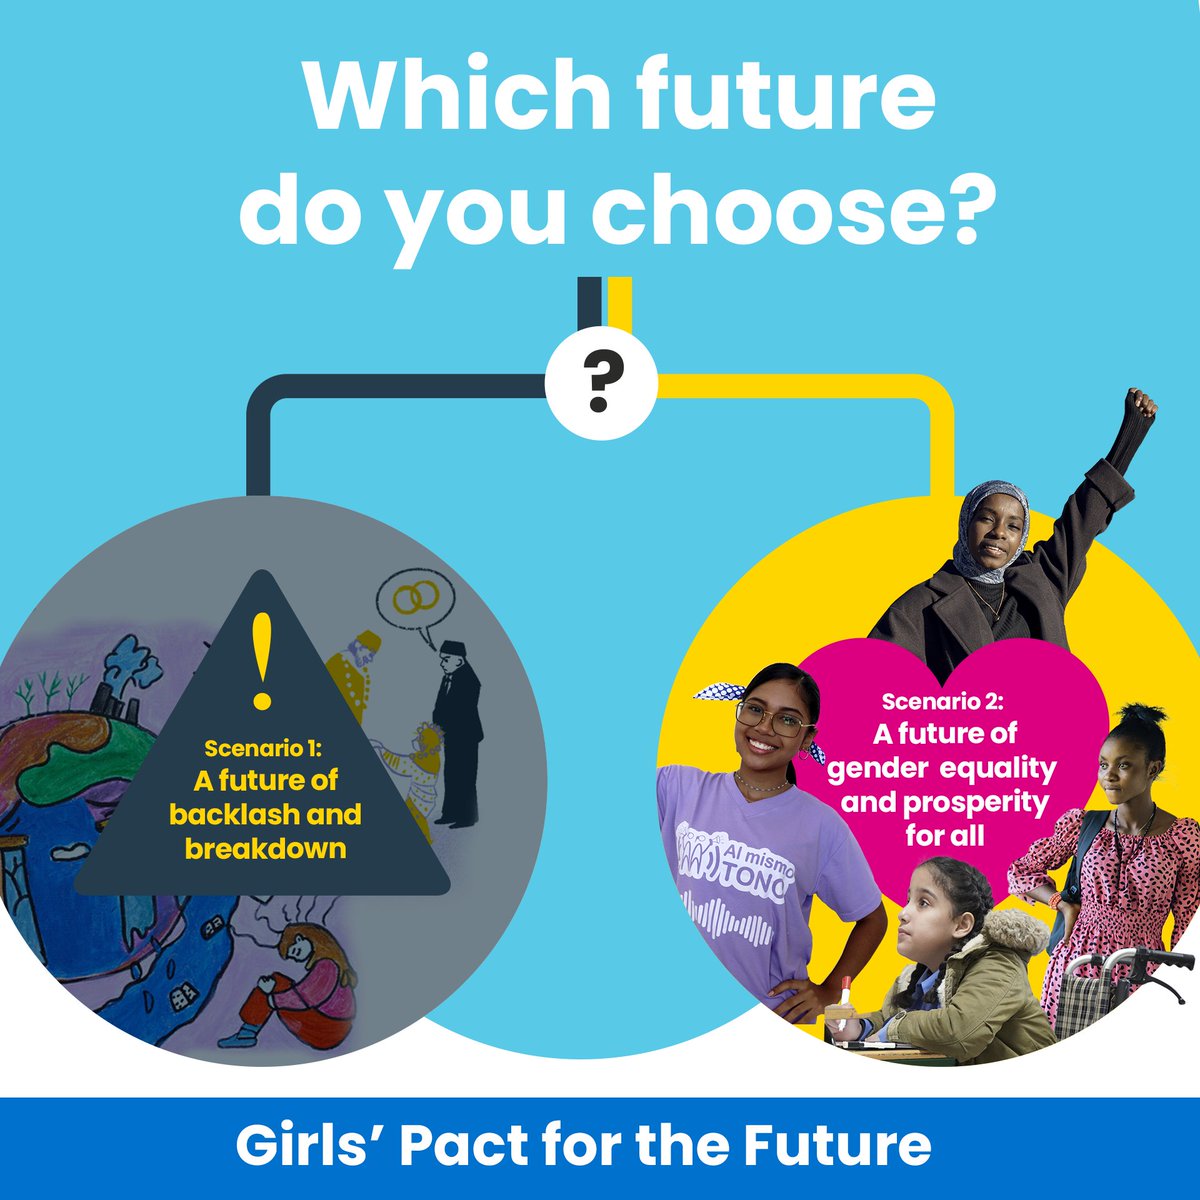 As a world leader, which is the future you choose? 👉🏽A future of backlash and breakdown 👉🏽A future of #GenderEquality and prosperity for all? Policy makers must step up global commitments to gender equality. plan-international.org/publications/o…